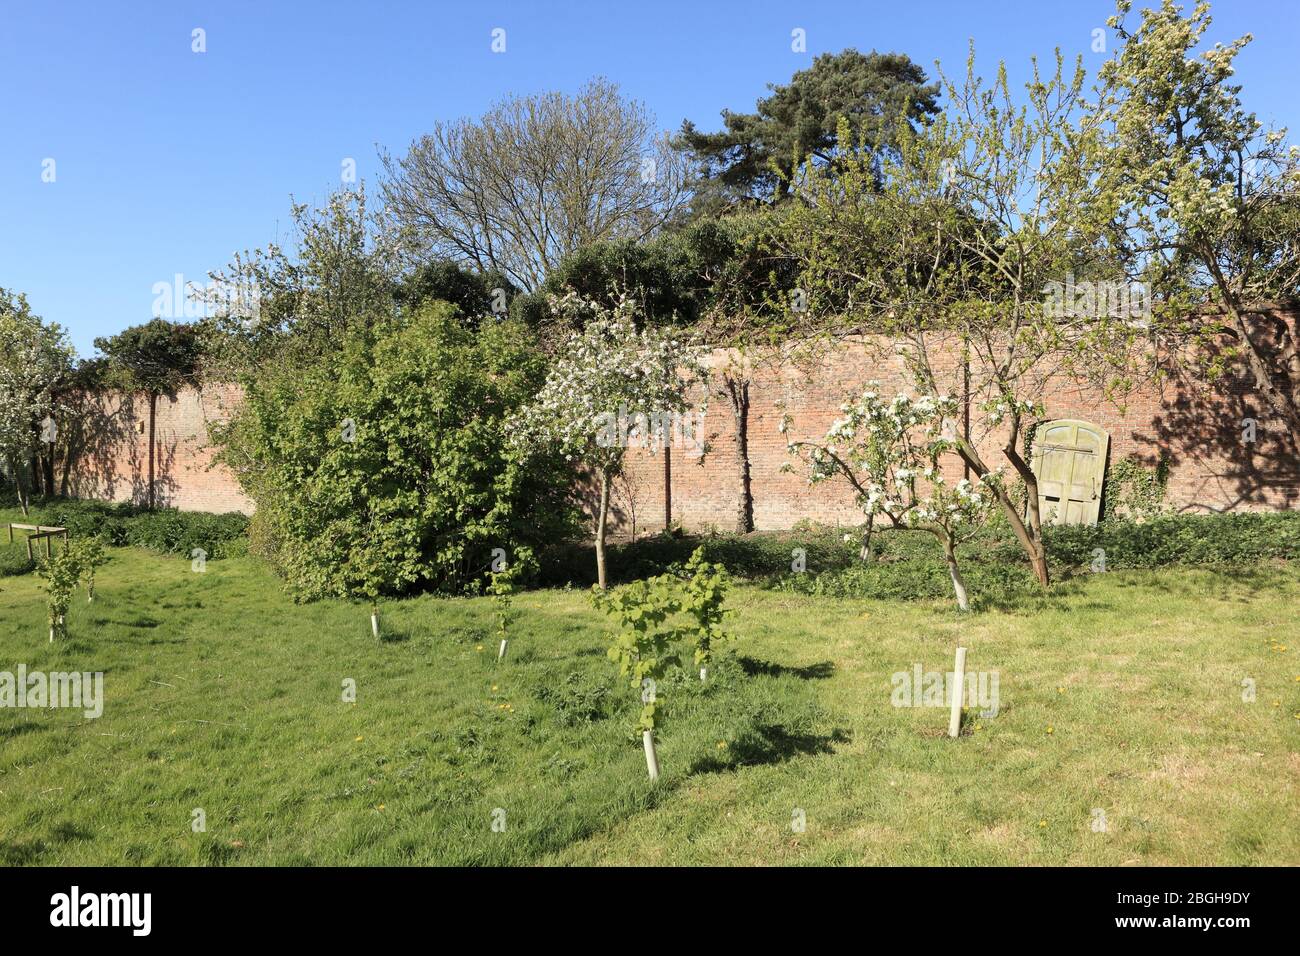 Conservation corner of an organic, environmental and wildlife friendly walled garden with flowering fruit trees and new shrub planting in springtime. Stock Photo